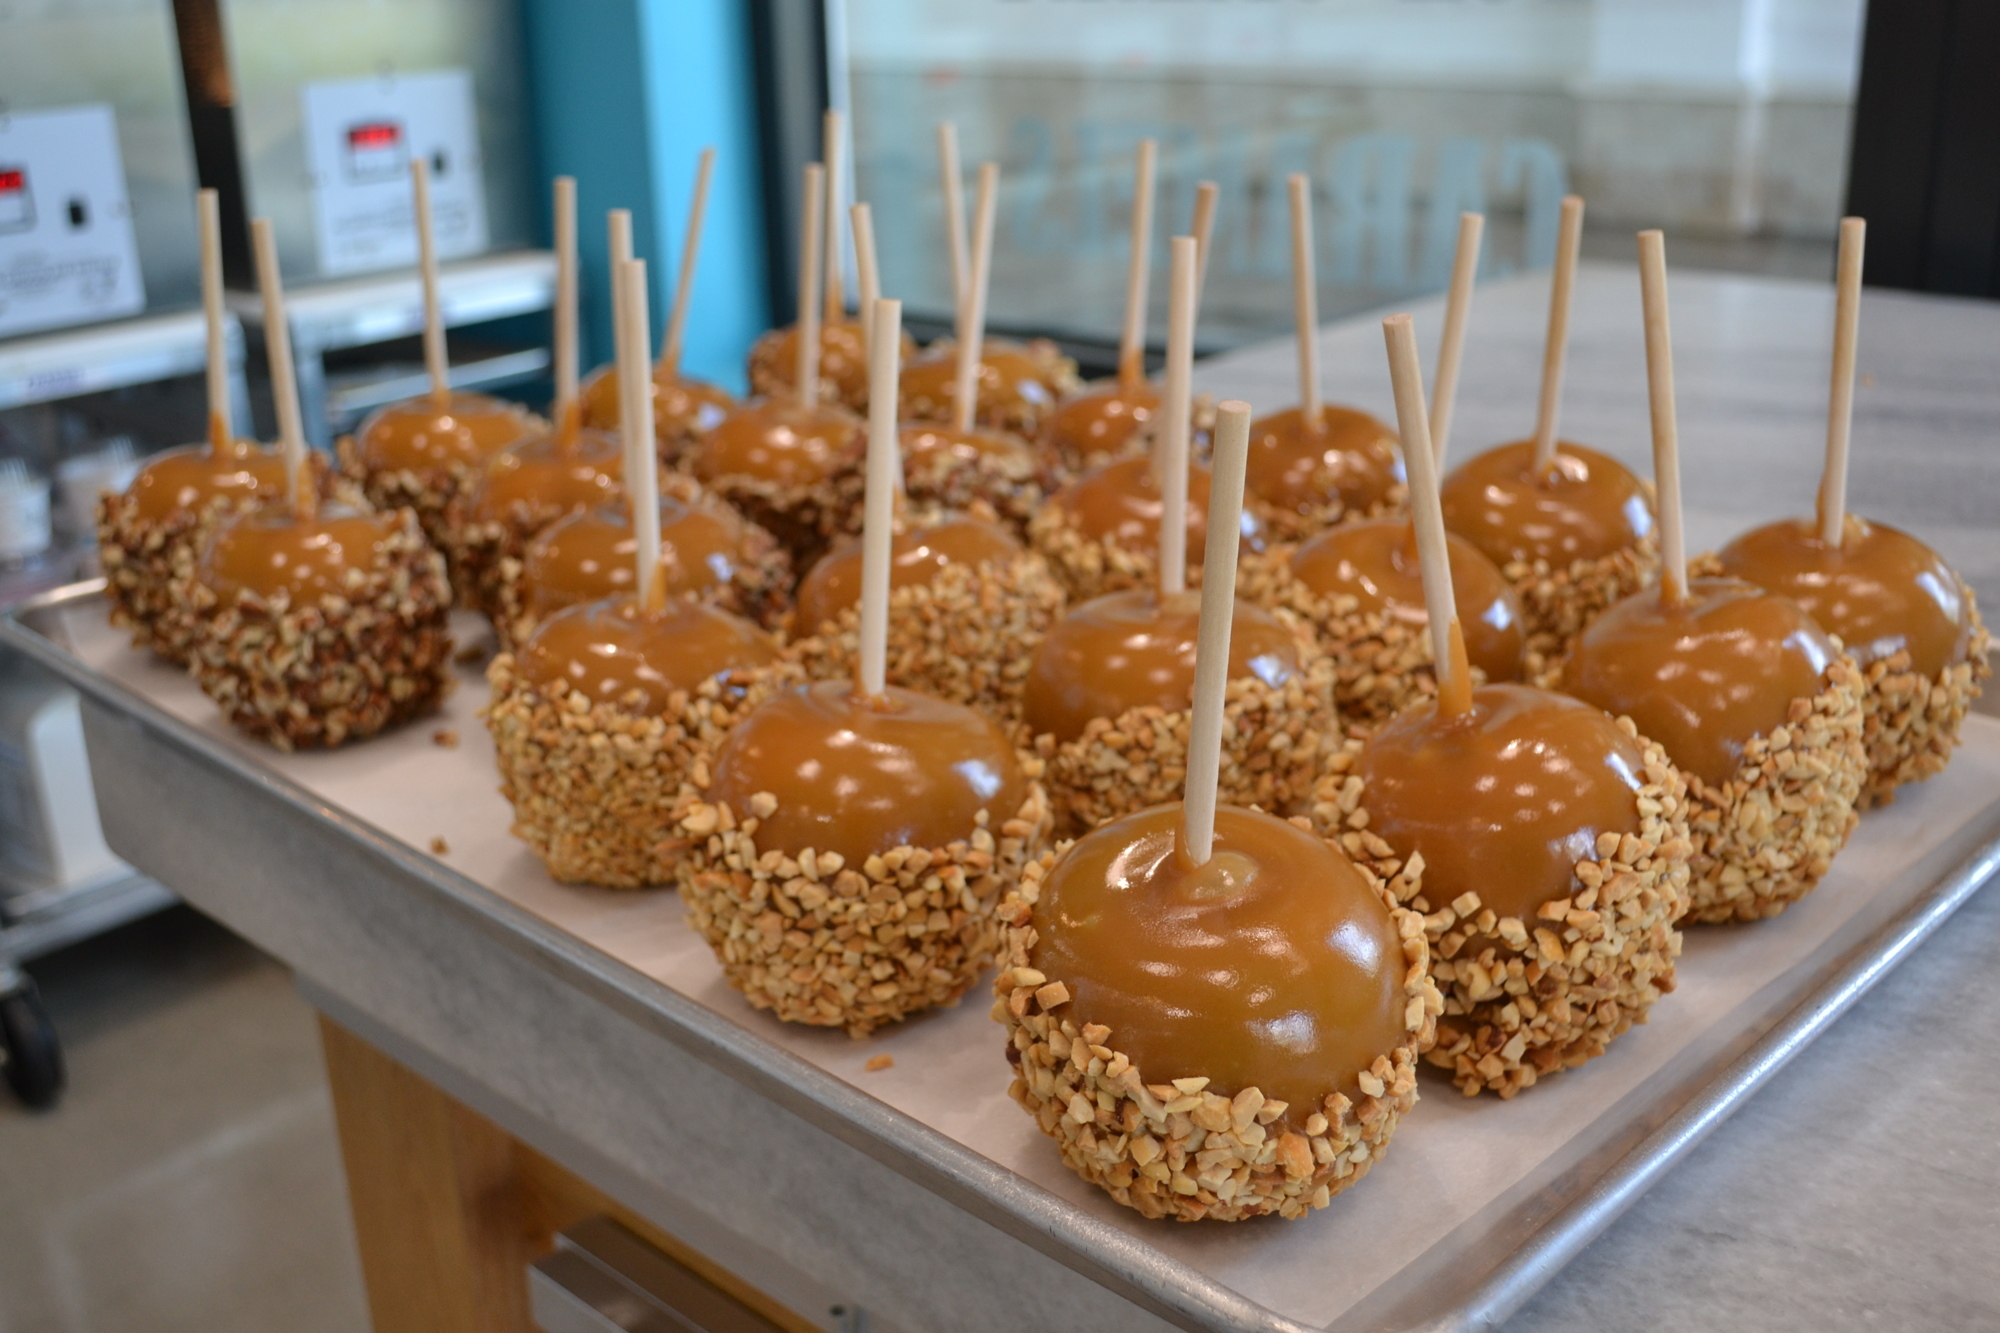 A tray of caramel apples stands ready to entice customers at Kilwins. (File photo)